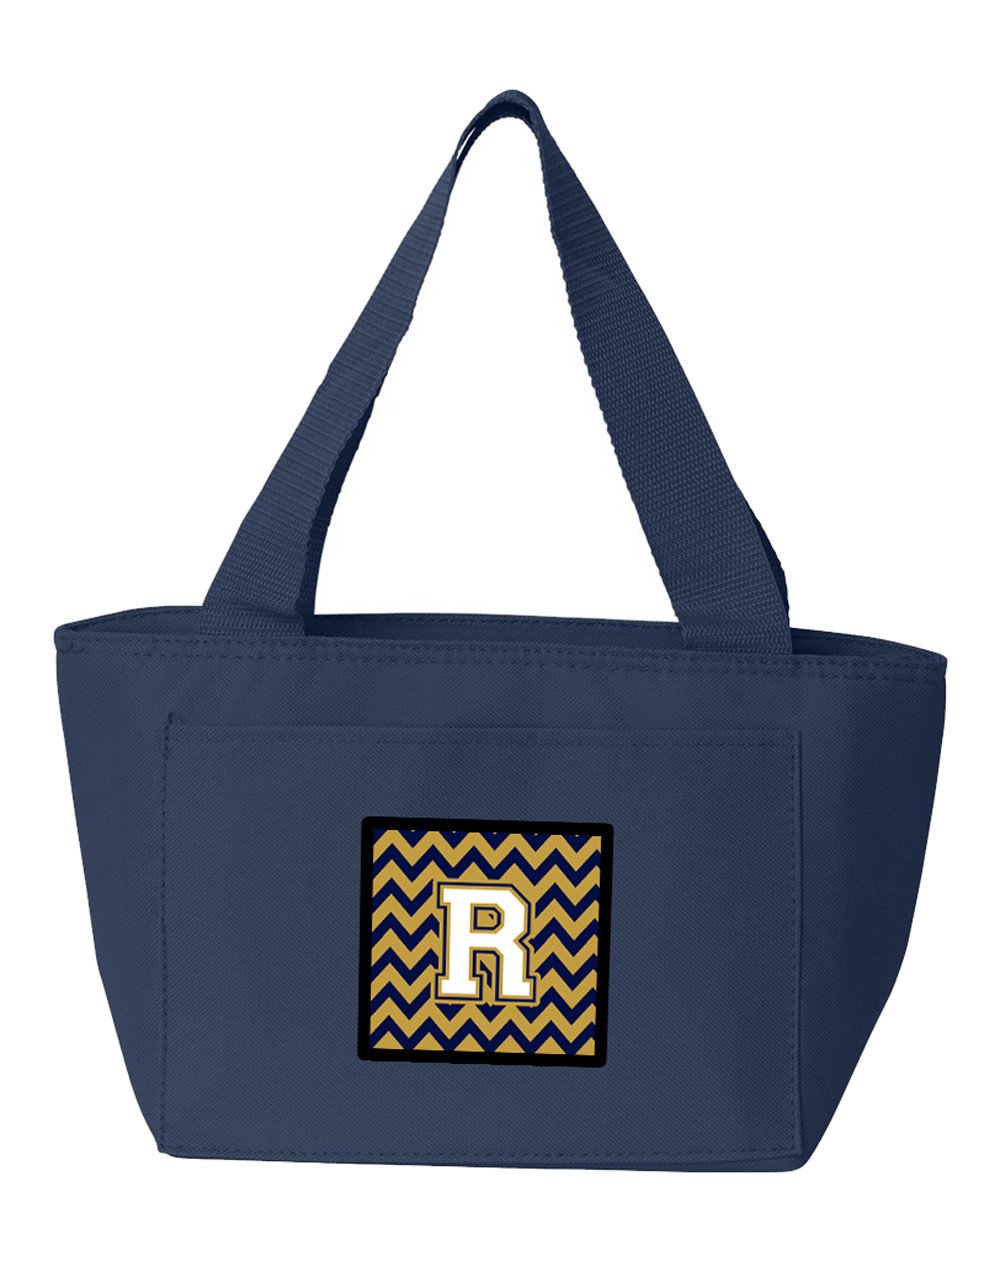 Letter R Chevron Navy Blue and Gold Lunch Bag CJ1057-RNA-8808 by Caroline's Treasures